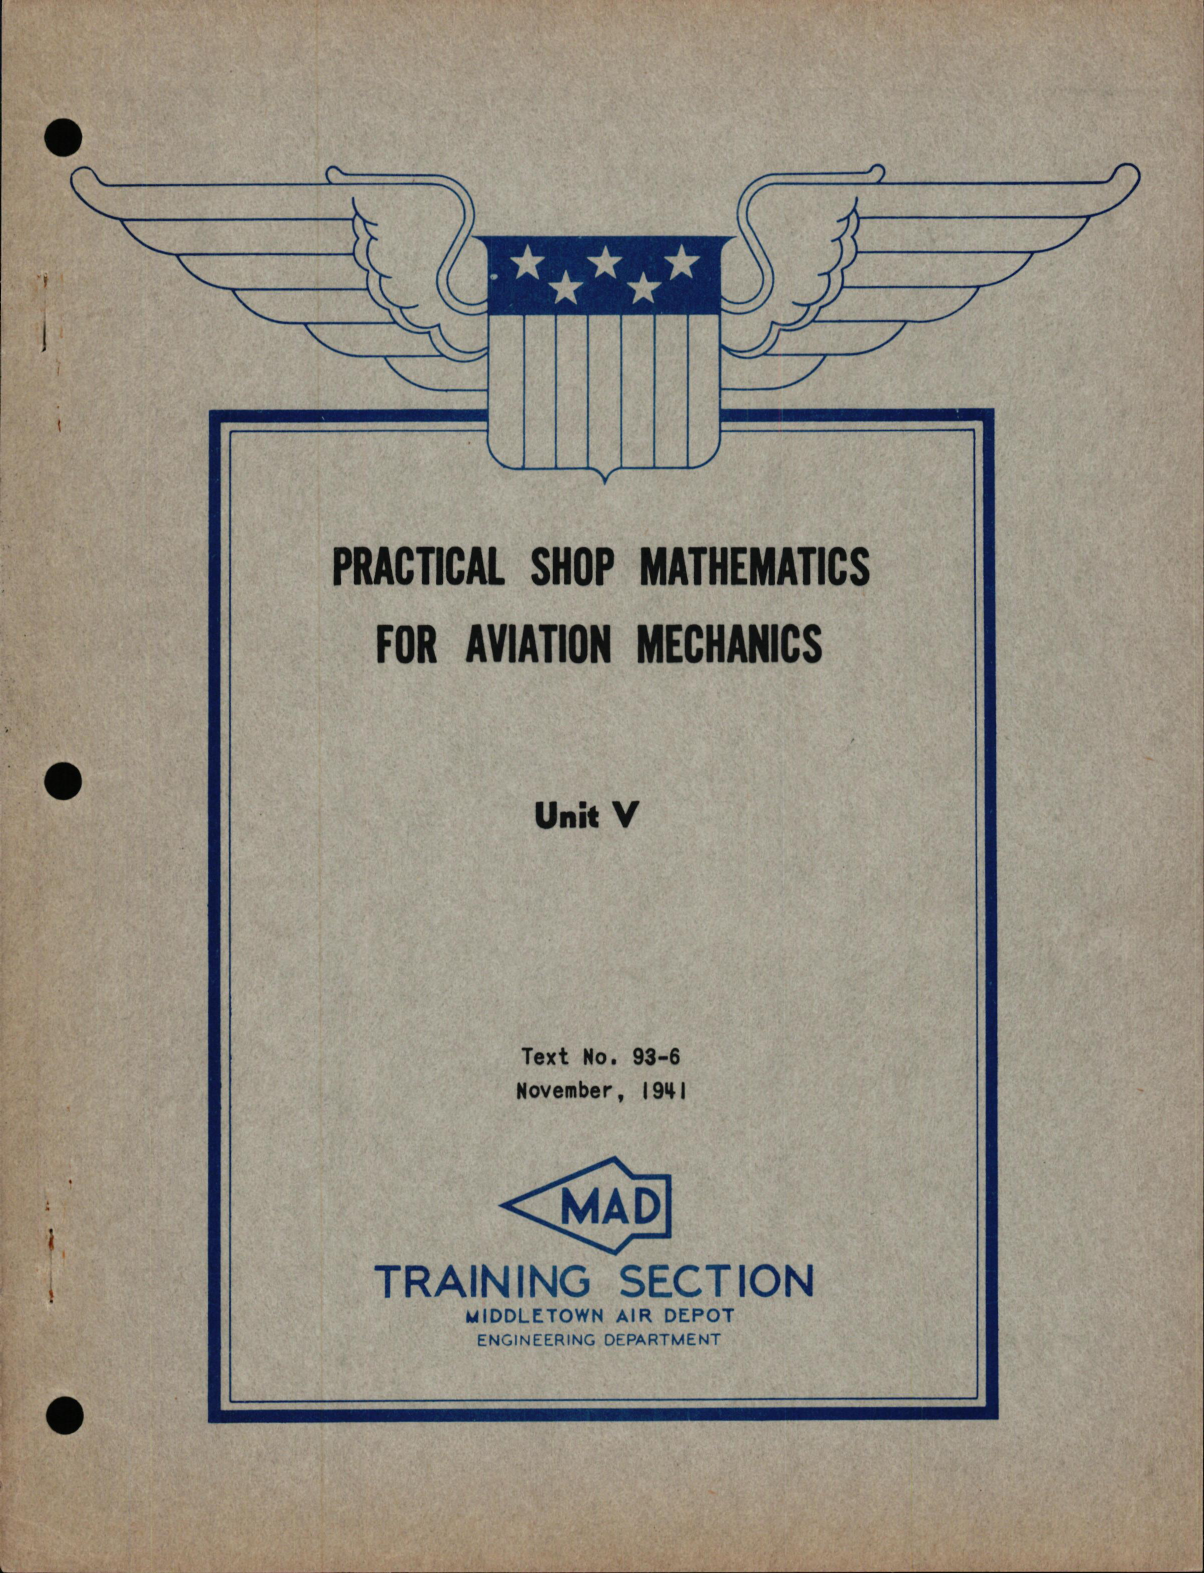 Sample page 1 from AirCorps Library document: Practical Shop Mathematics for Aviation Mechanics Unit V